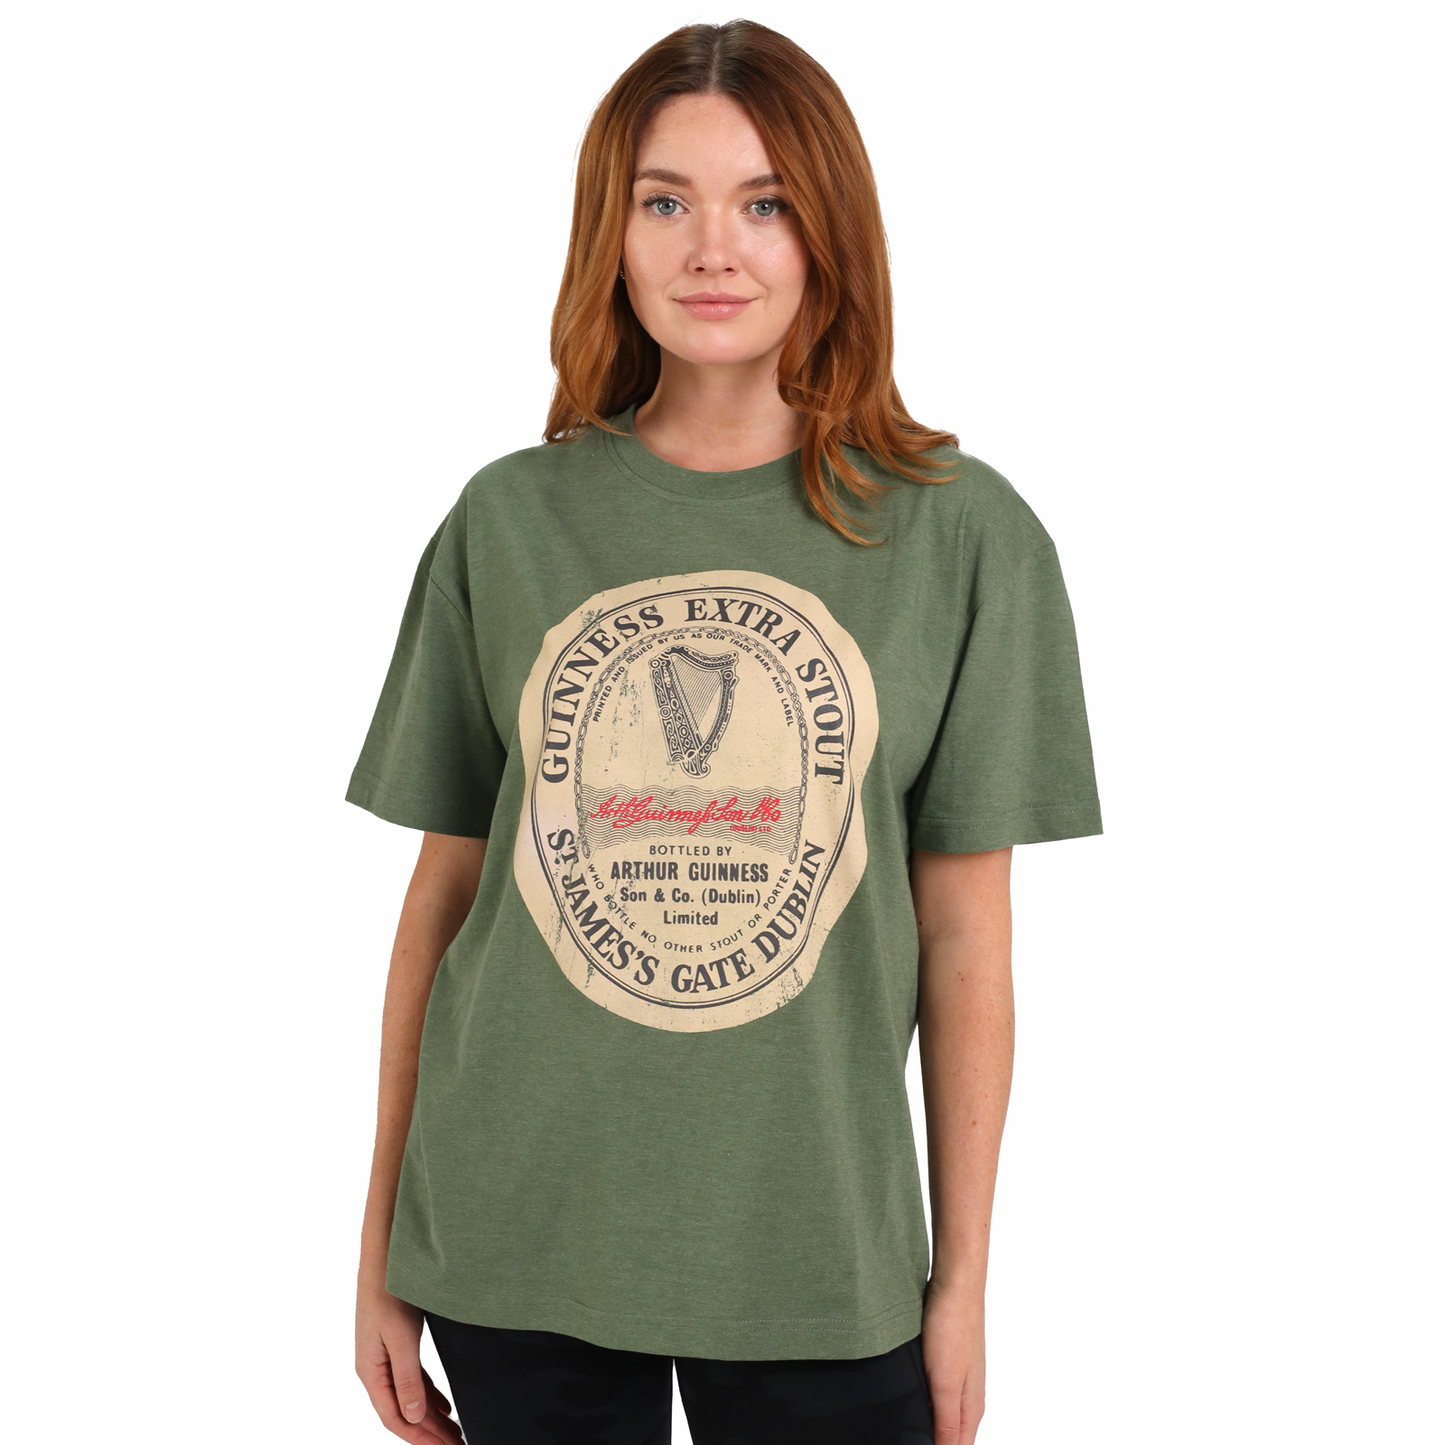 A woman wearing a green Distressed Irish Label Tee adorned with the Irish flag, perfect for your SEO-optimized product description from Guinness.